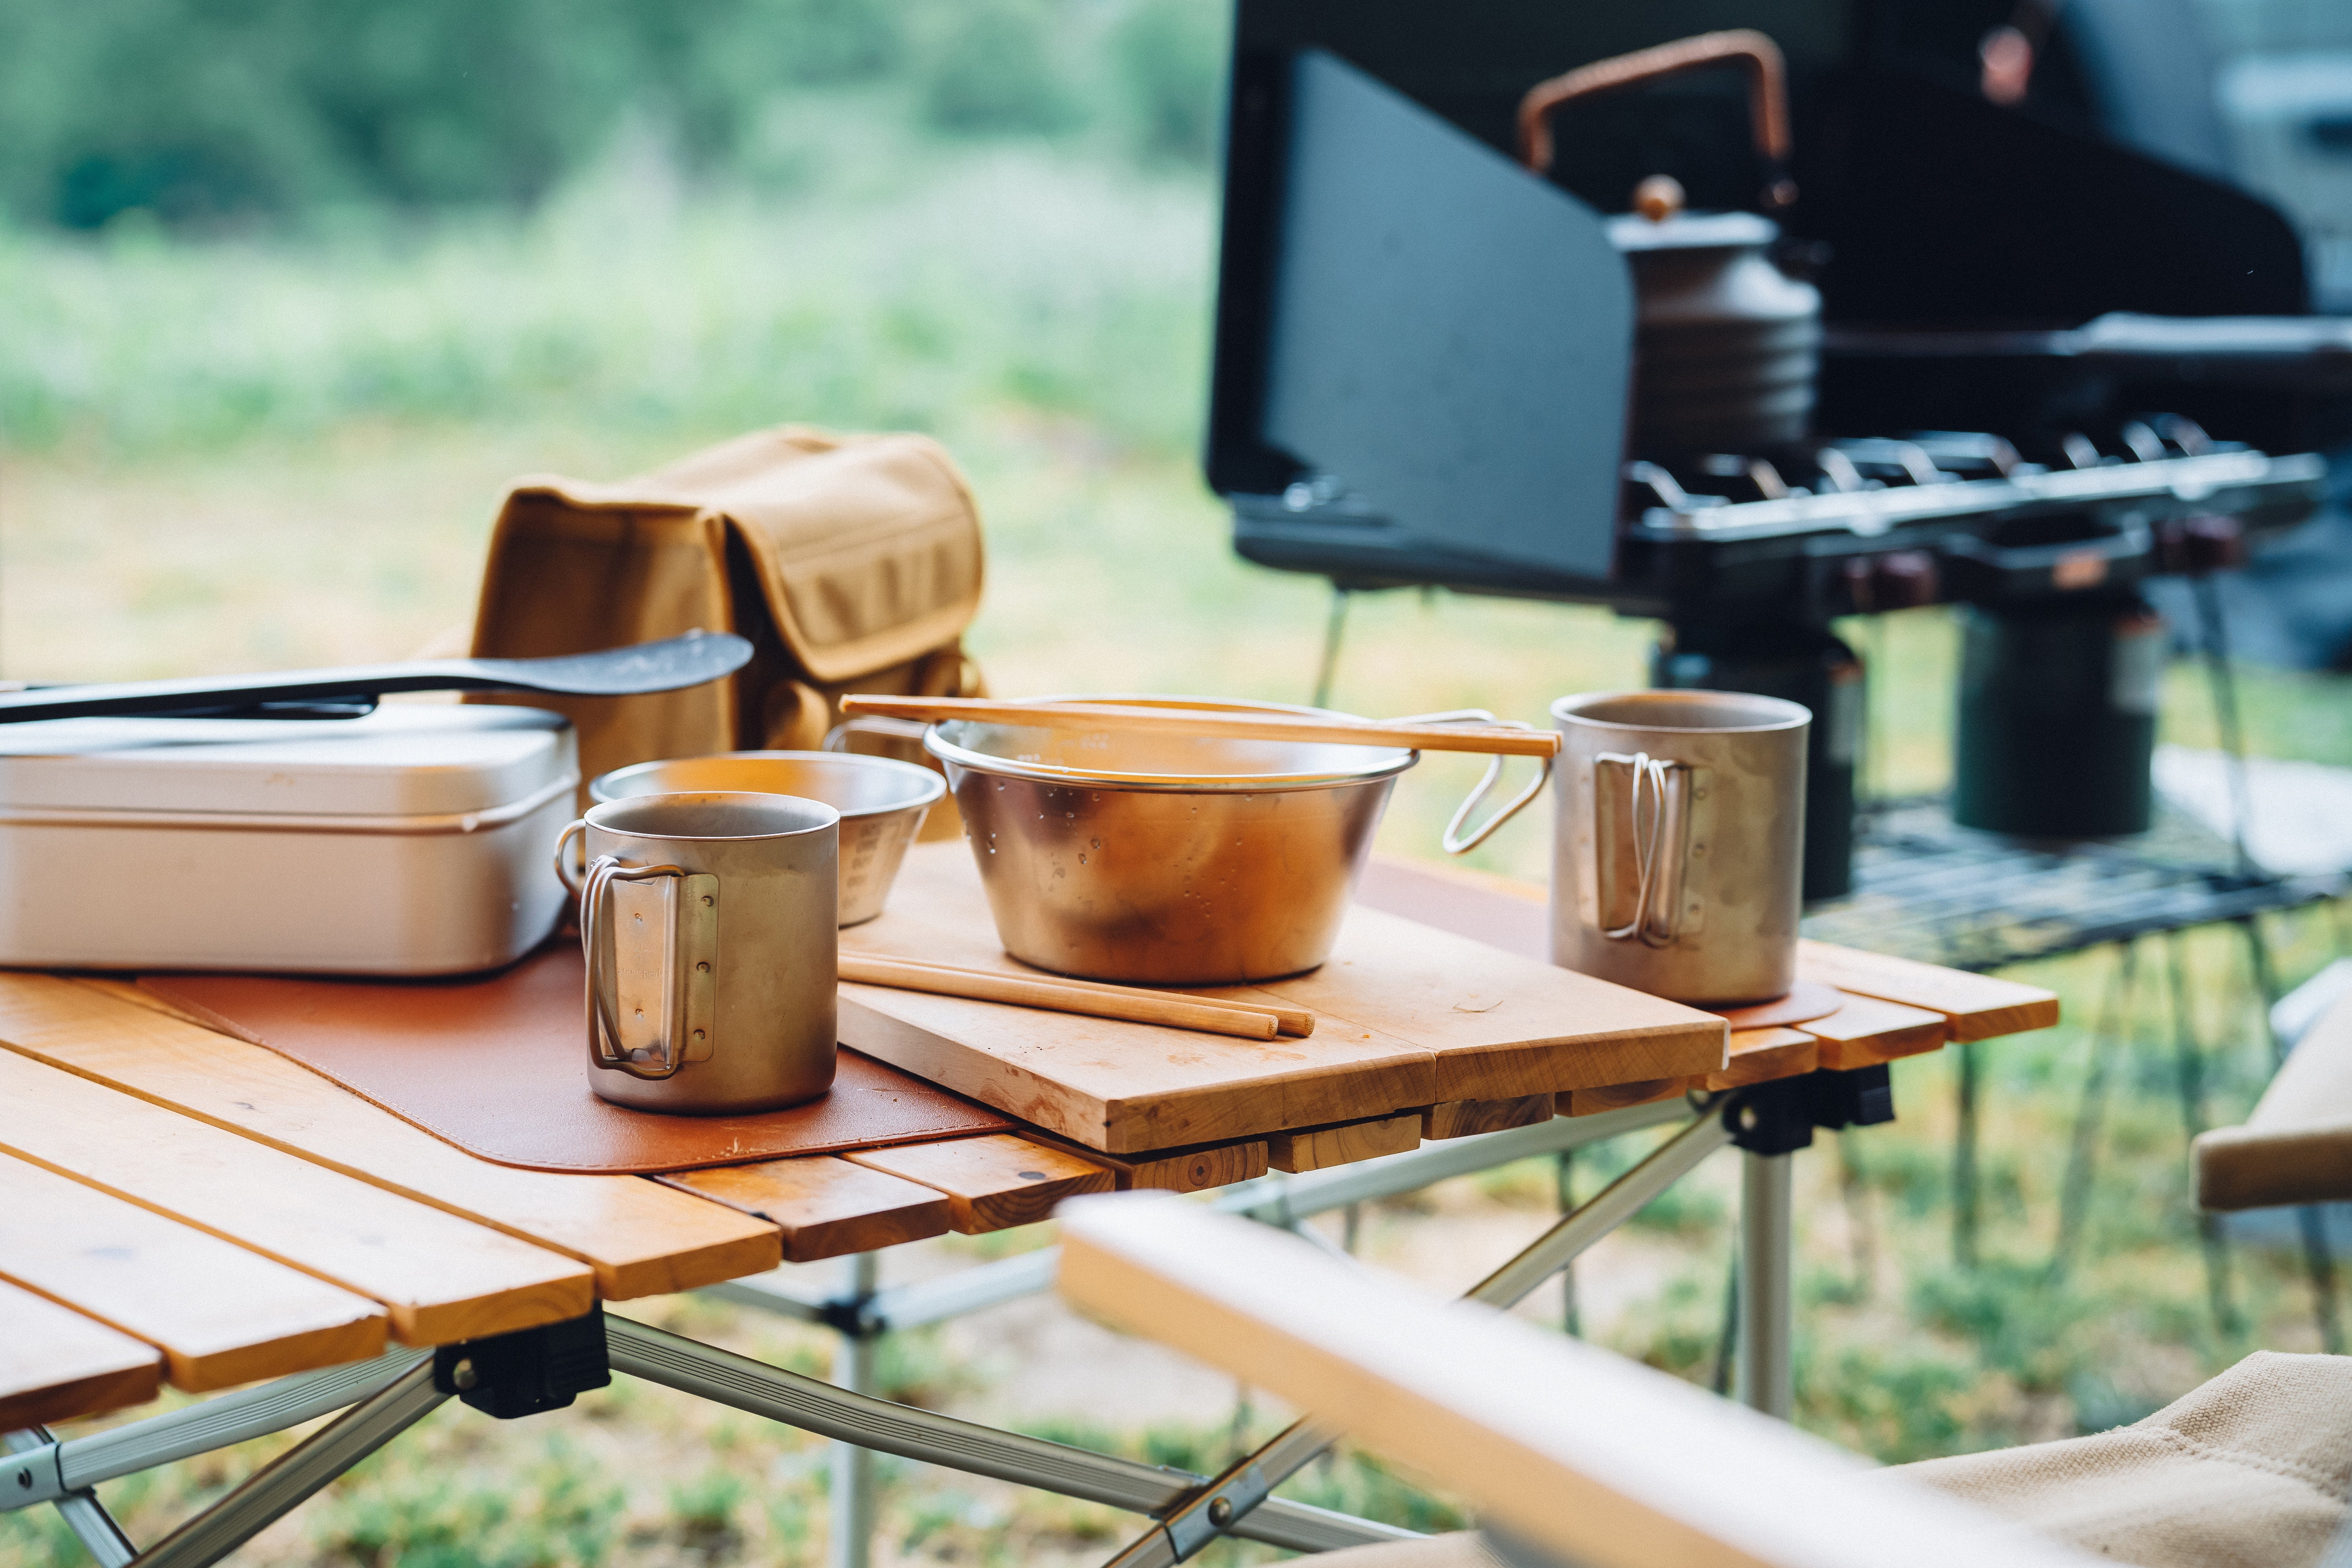 https://upgradedpoints.com/wp-content/uploads/2021/09/camping-kitchen-and-utensils.jpeg